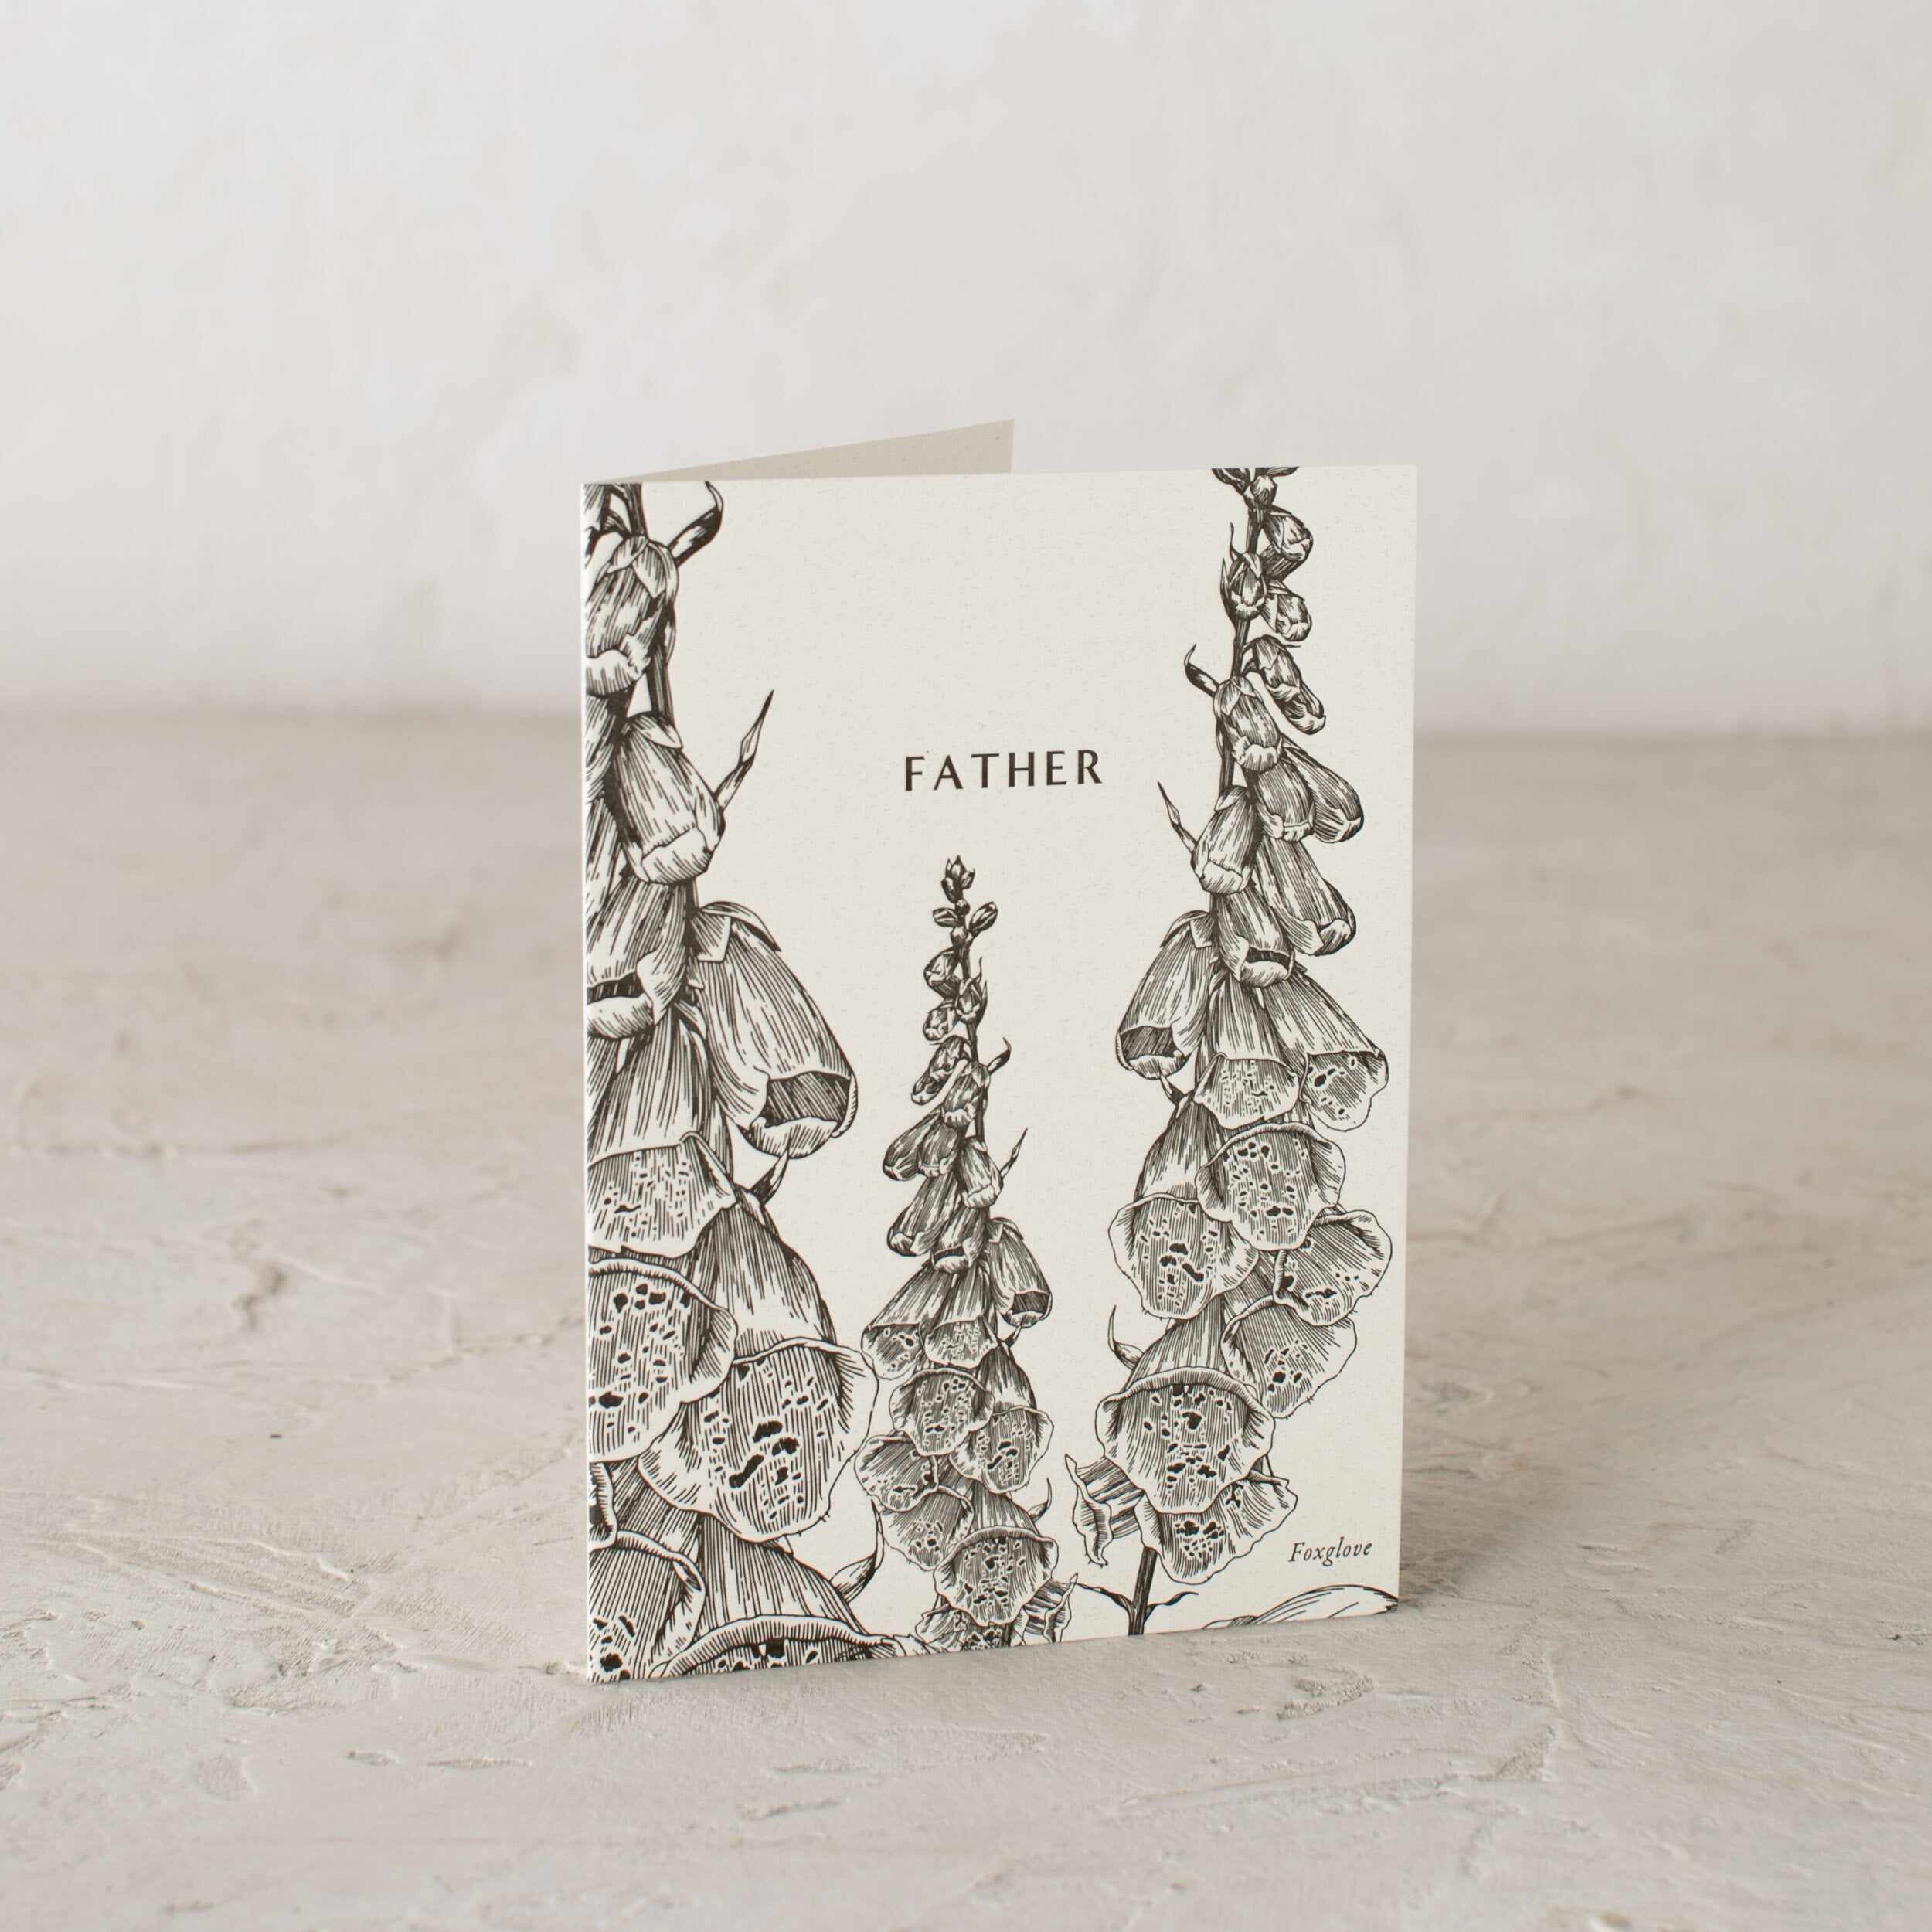 Letter-pressed botanical greeting card. Fox glove illustration labeled "Father"